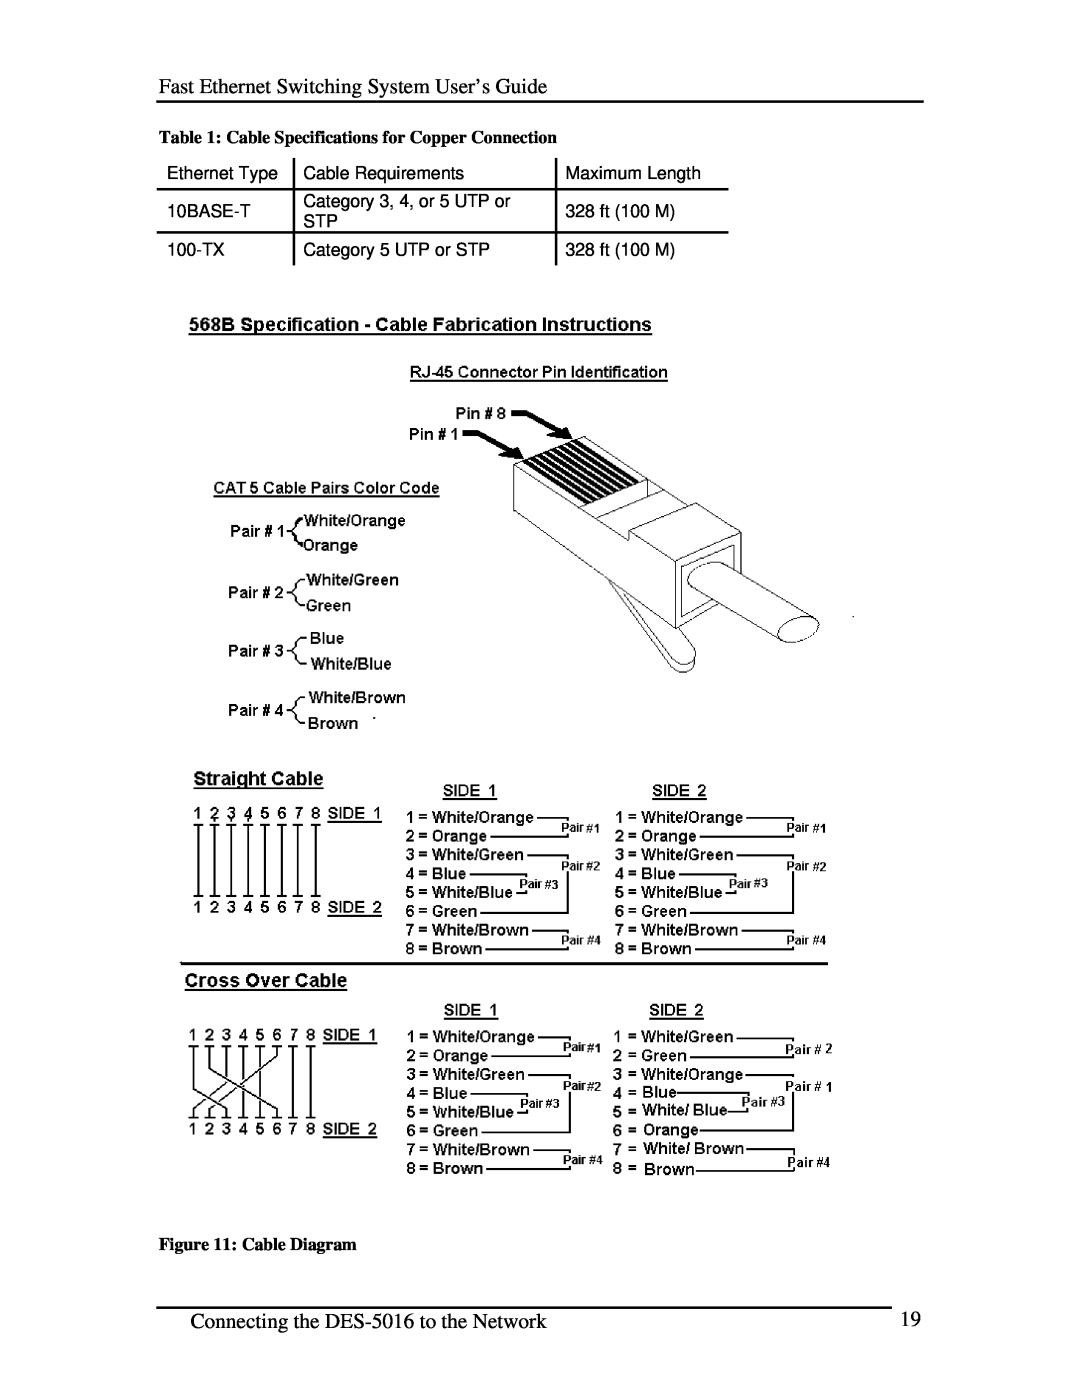 D-Link manual Fast Ethernet Switching System User’s Guide, Connecting the DES-5016 to the Network, Cable Diagram 